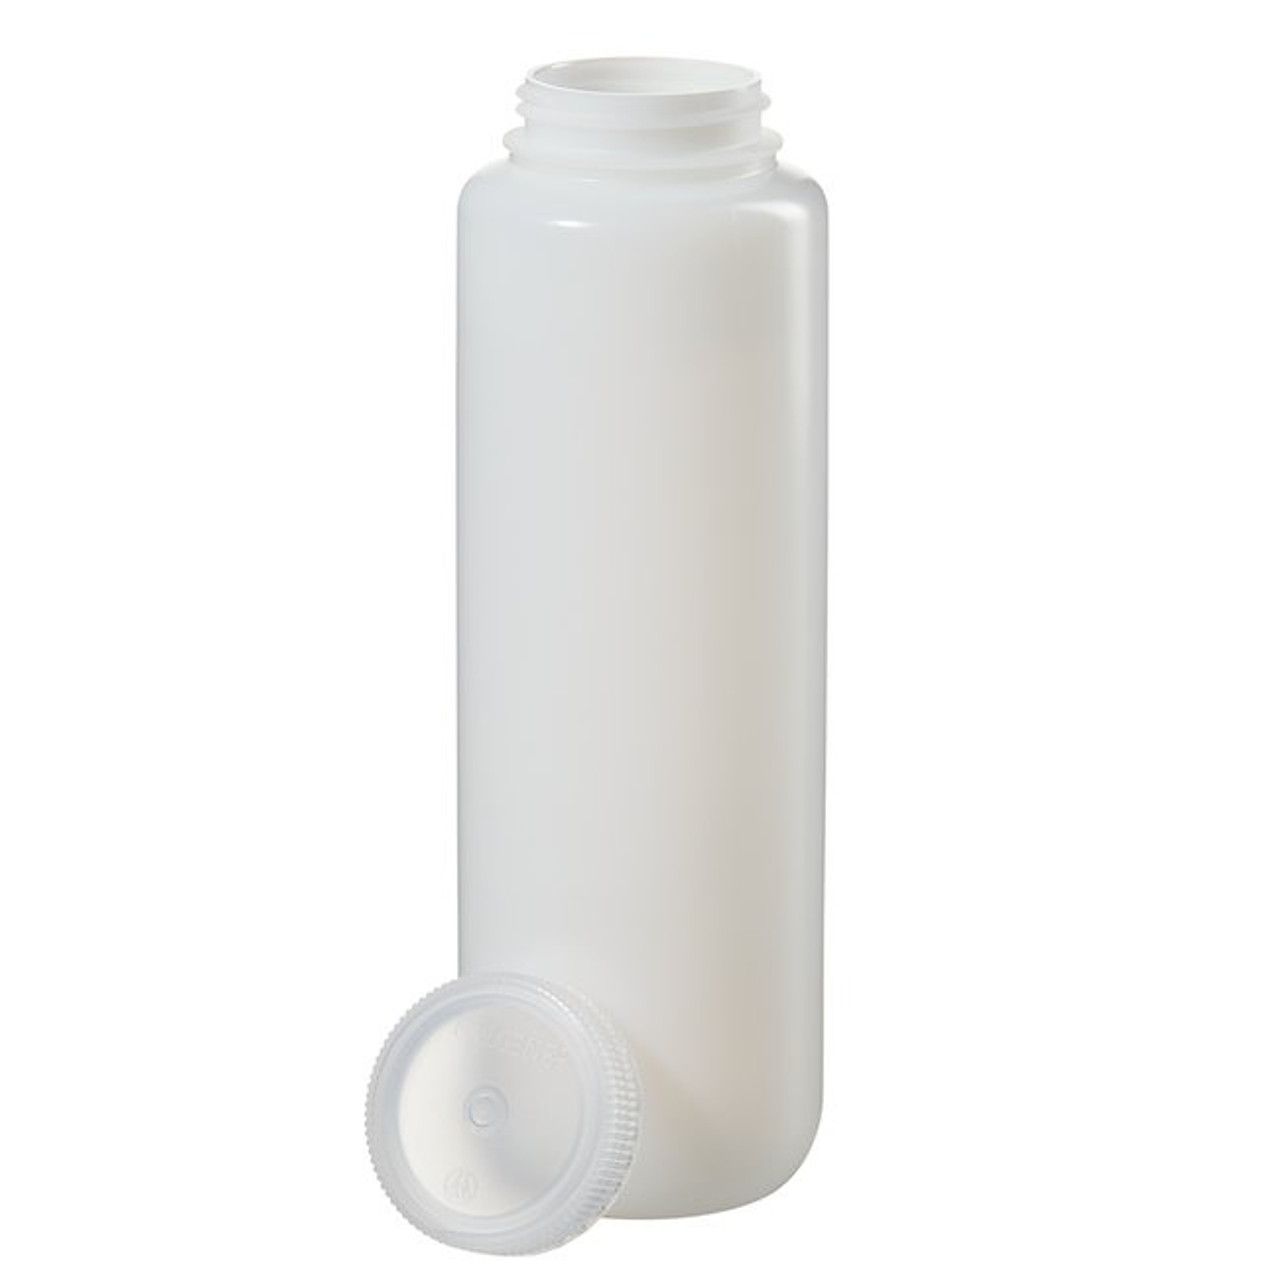 Fisherbrand™ Reusable Glass Media Bottles with Cap